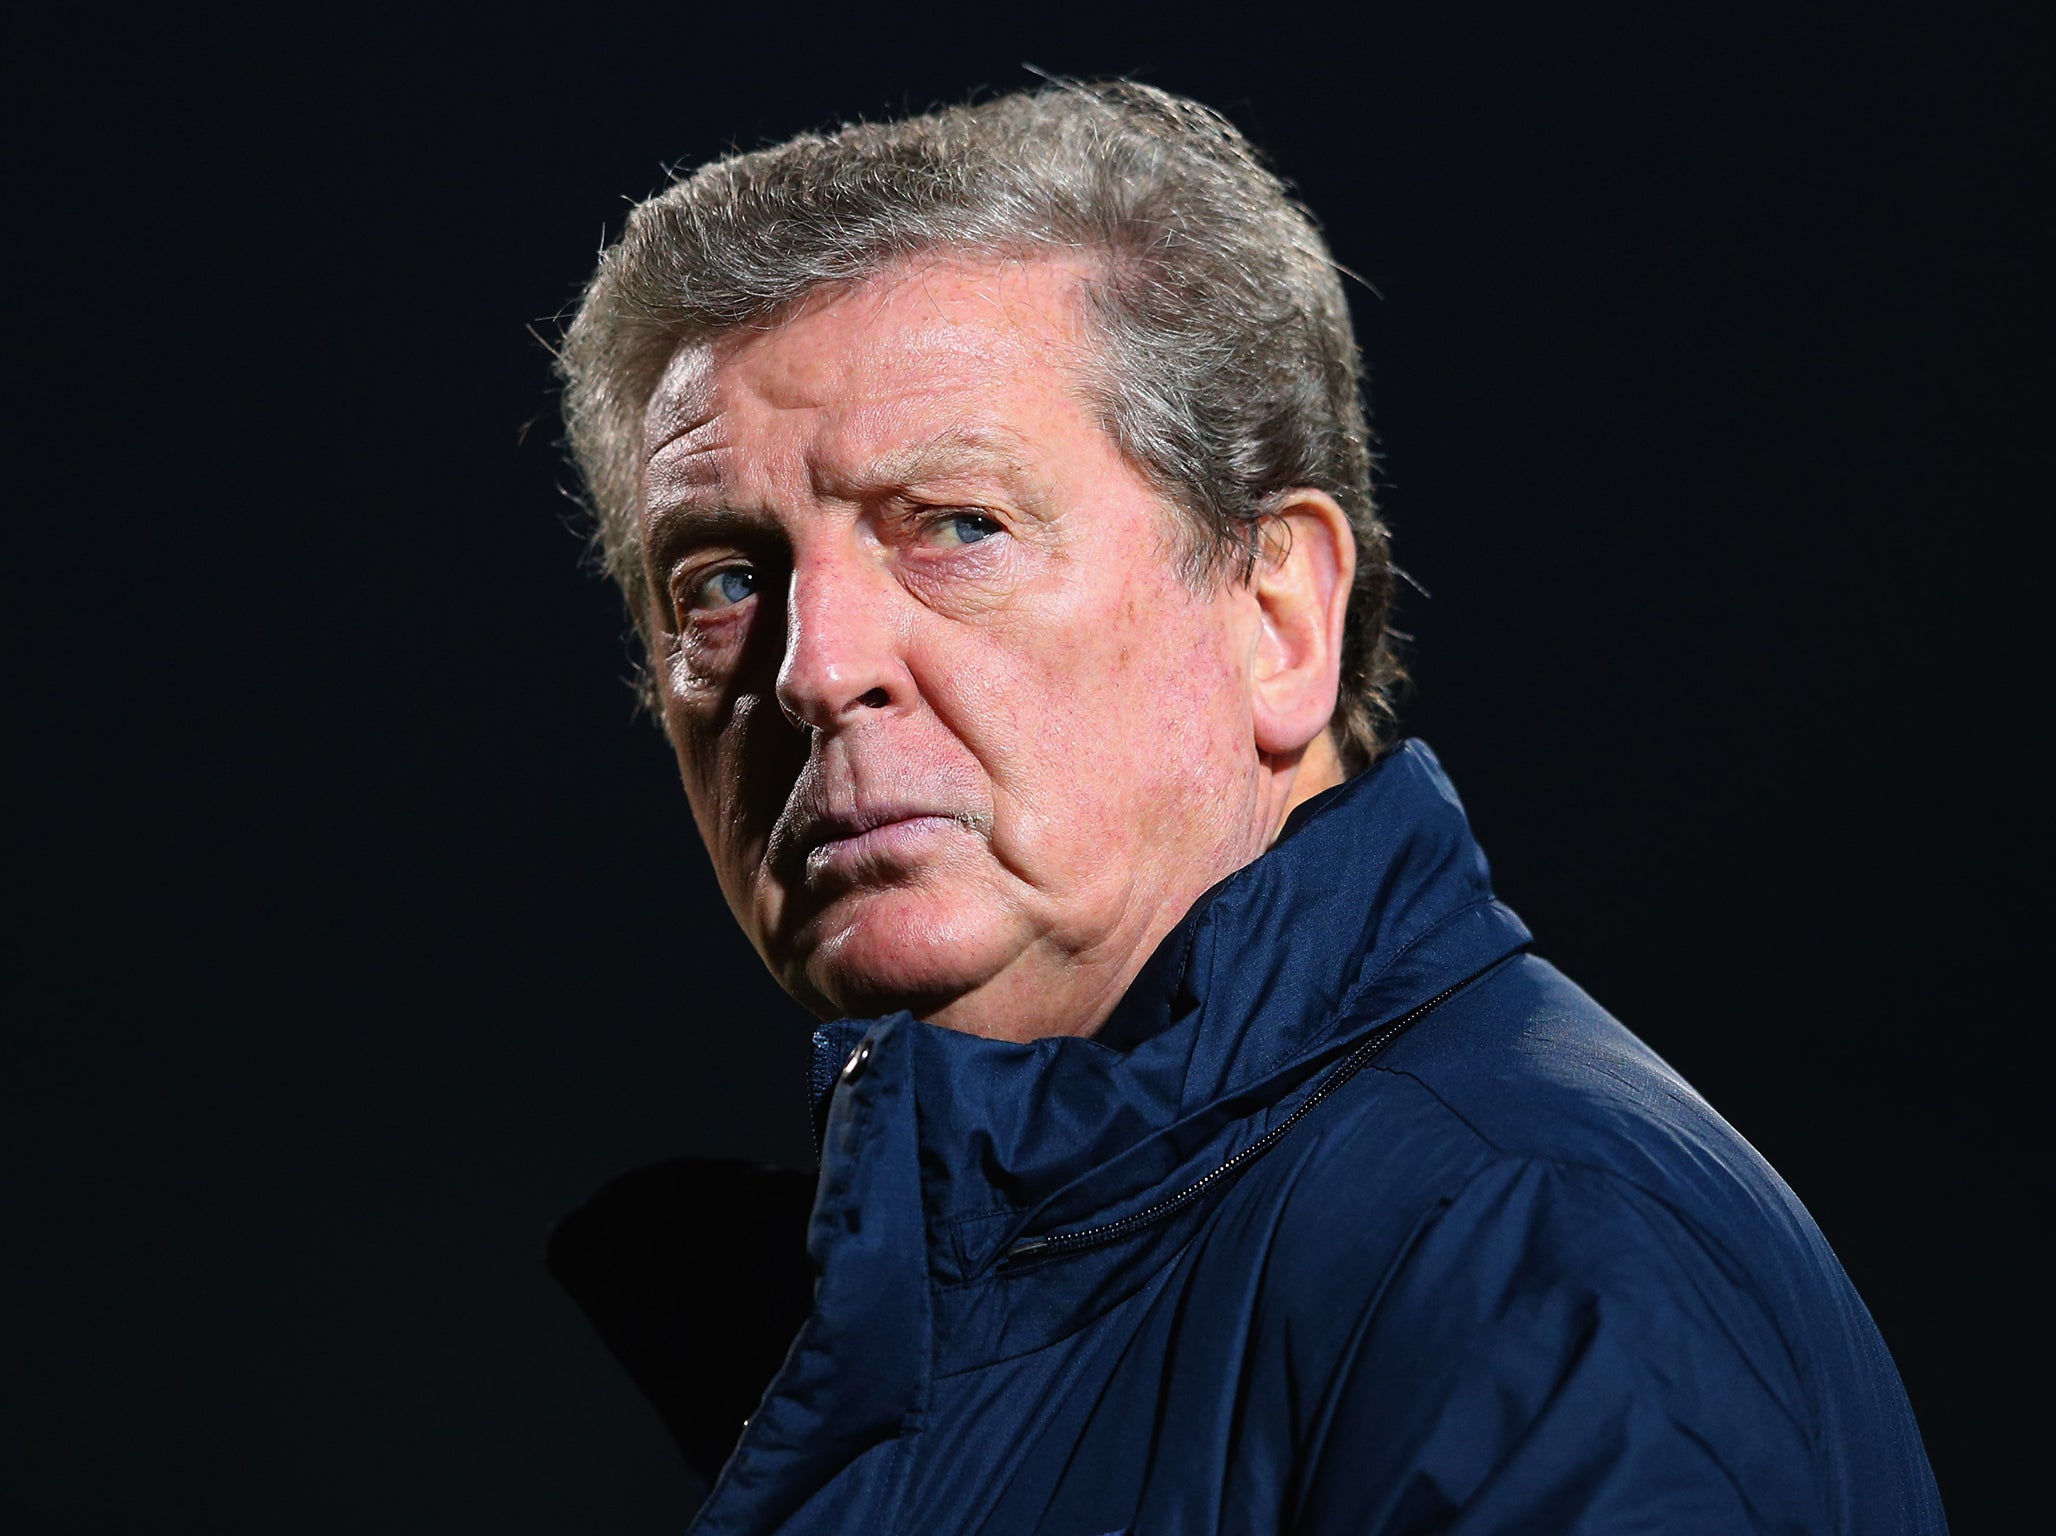 Hodgson is poised to replace Frank De Boer at Palace